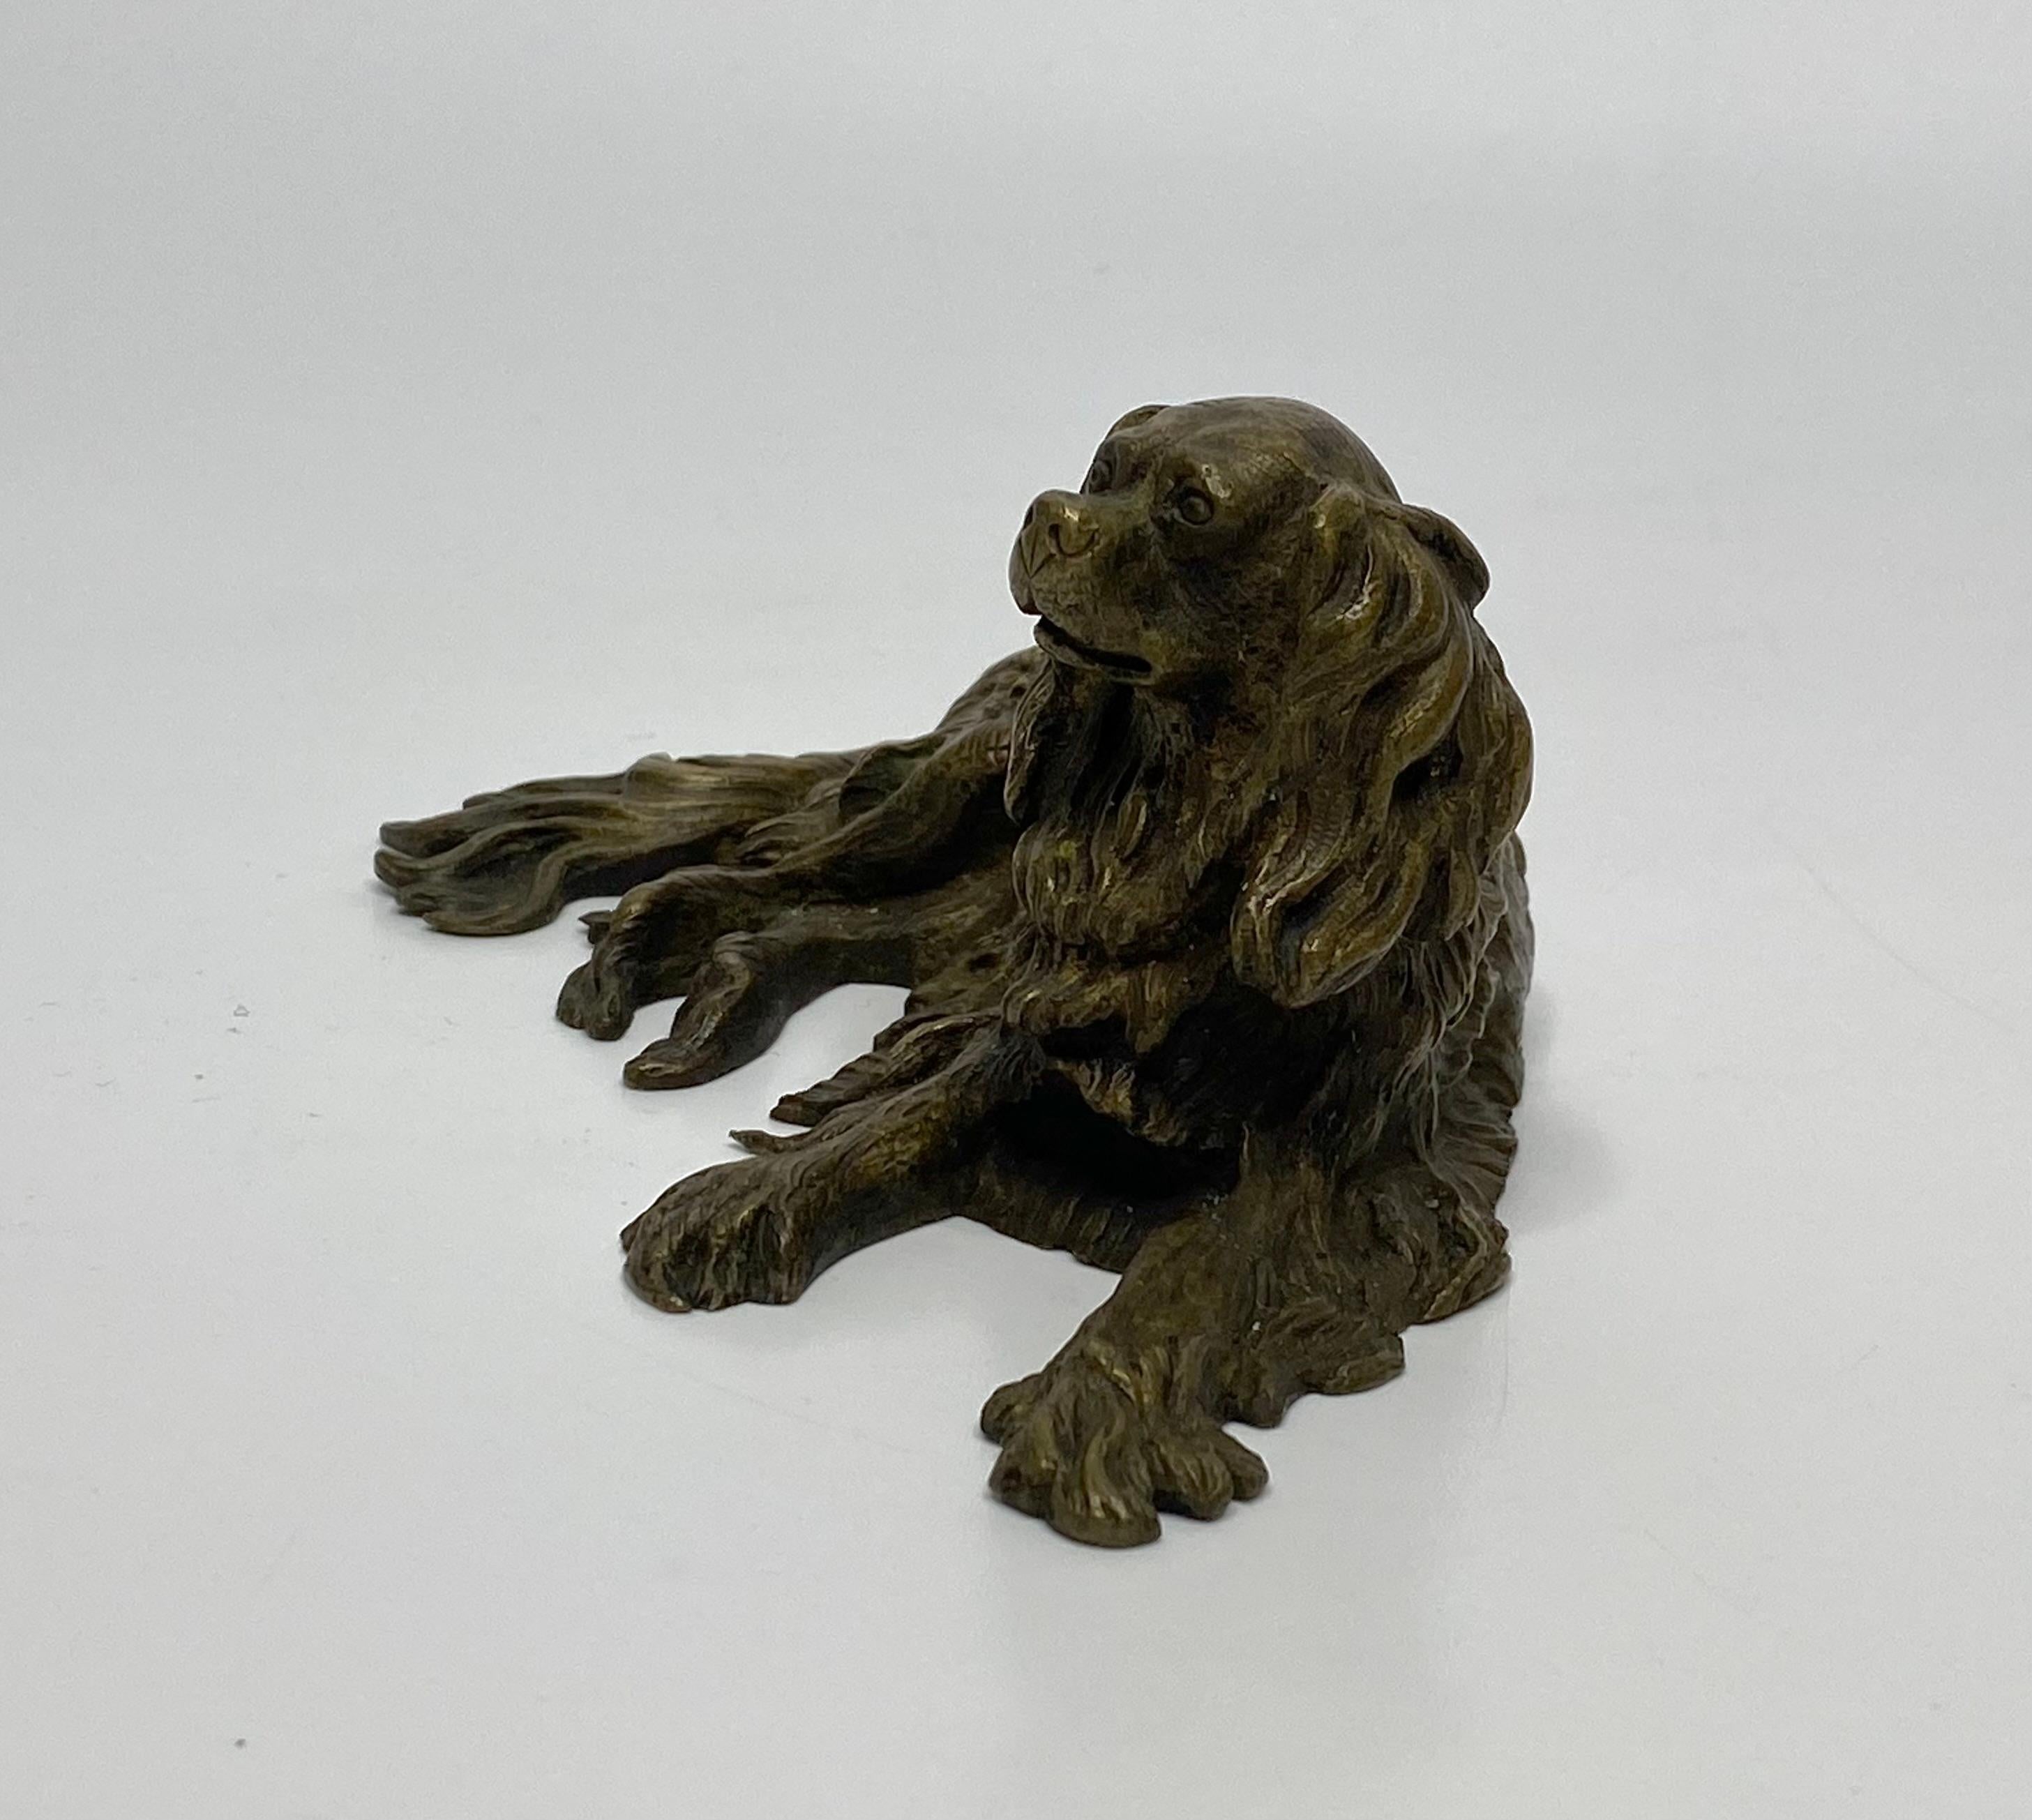 A bronze figure of a Spaniel, England, c. 1840. The recumbent Spaniel with a charming expression on its face, finely cast, and hand finished, with its hair intricately rendered.
Length – 15.2 cm, 6”.
Height – 6.2 cm, 2 3/8”.
Depth – 7.5 cm,